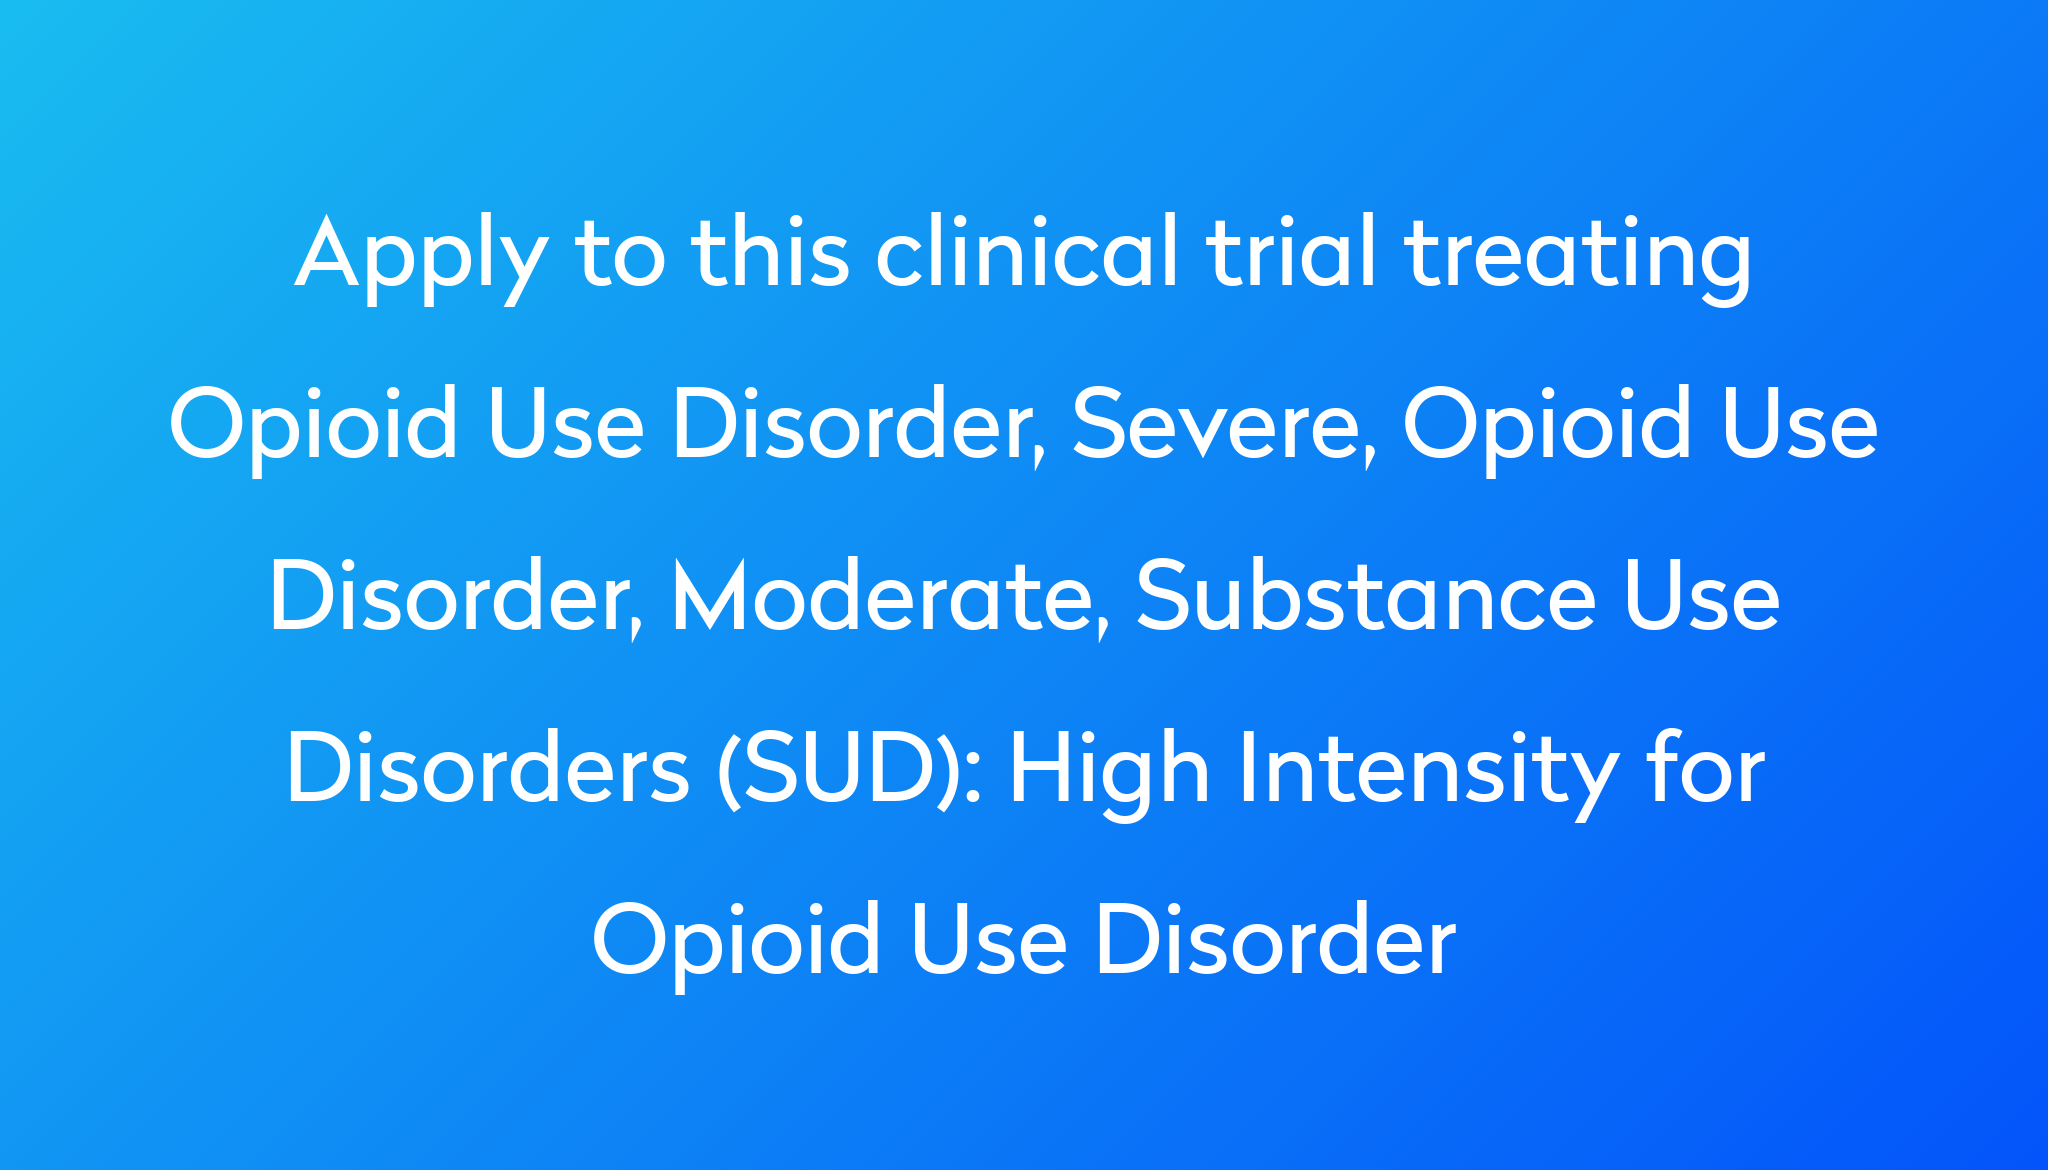 high-intensity-for-opioid-use-disorder-clinical-trial-2023-power